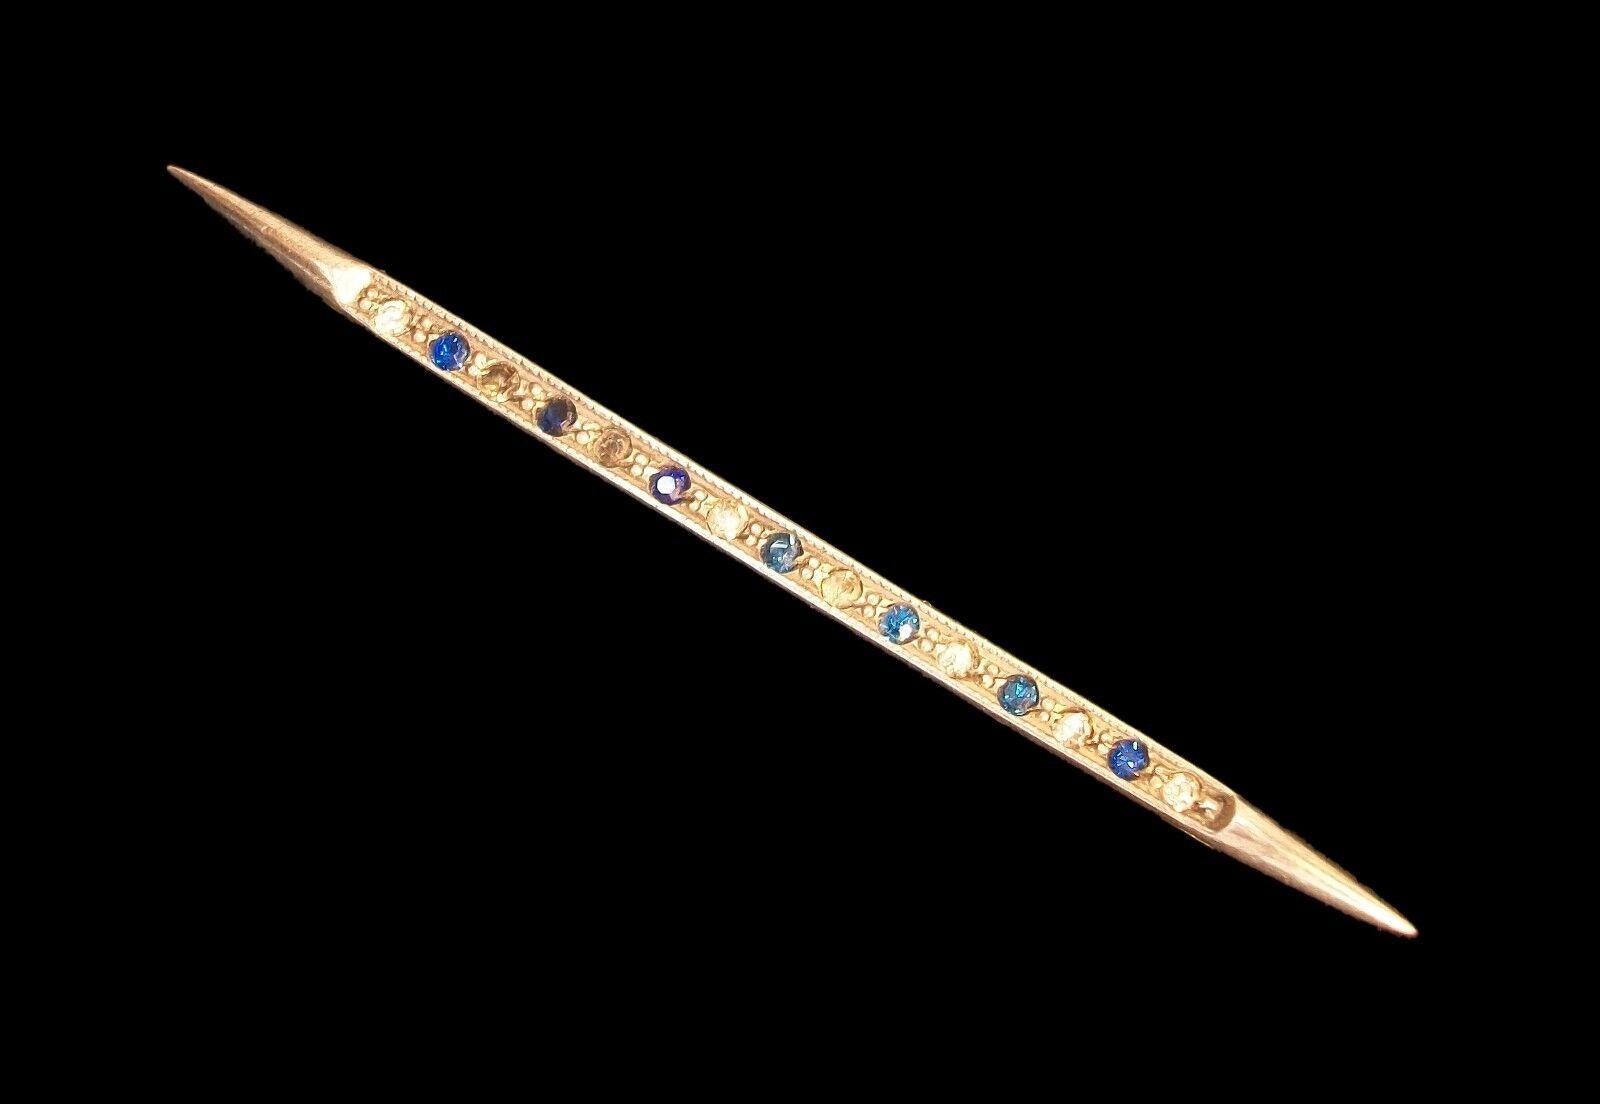 Art Deco sterling silver bar brooch/pin set with blue and clear rhinestones (faux sapphires and diamonds) - original reverse safety catch and pin with round hinge - unsigned - United States (likely) - circa 1930's.

Excellent antique condition - all